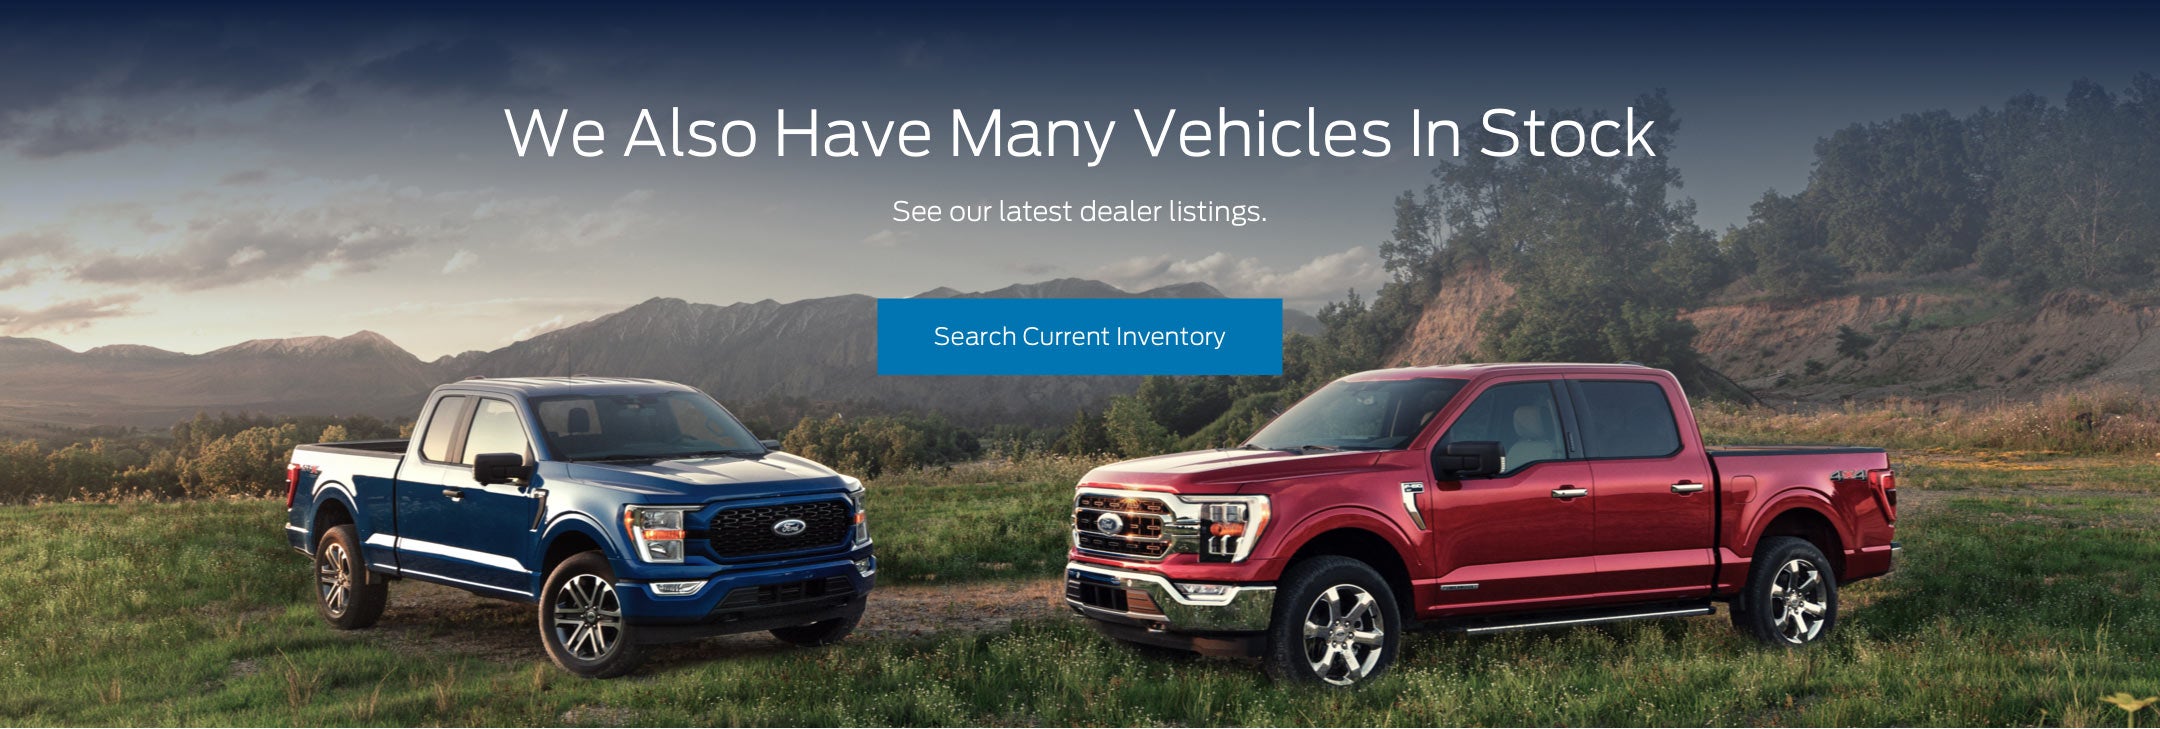 Ford vehicles in stock | Paul Clark Ford, Inc. in Yulee FL